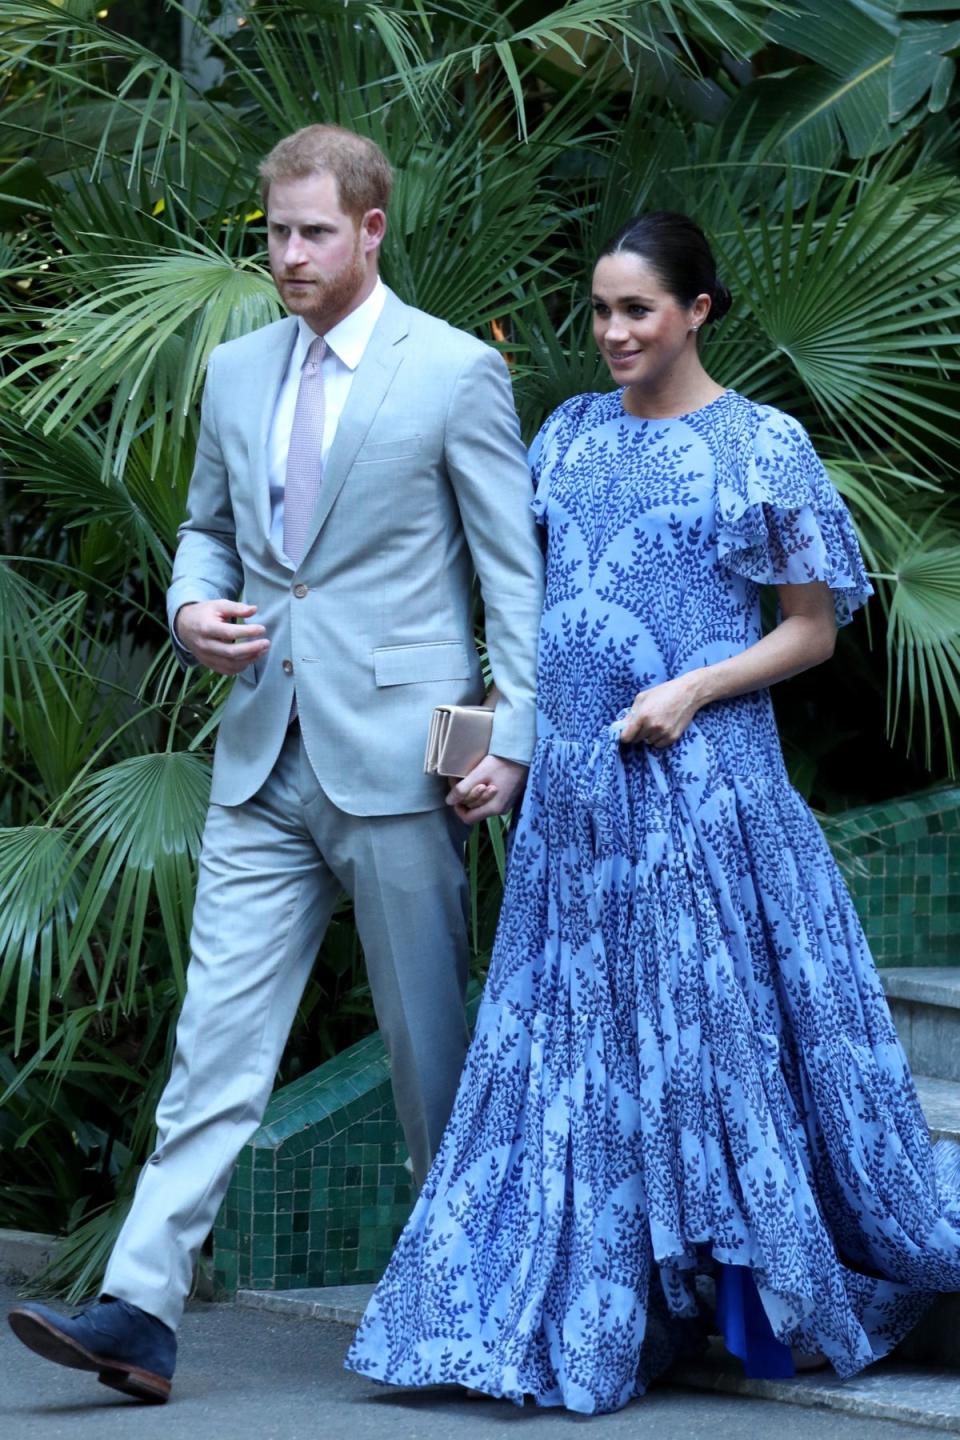 The Duke and Duchess of Sussex in 2019 (Getty)